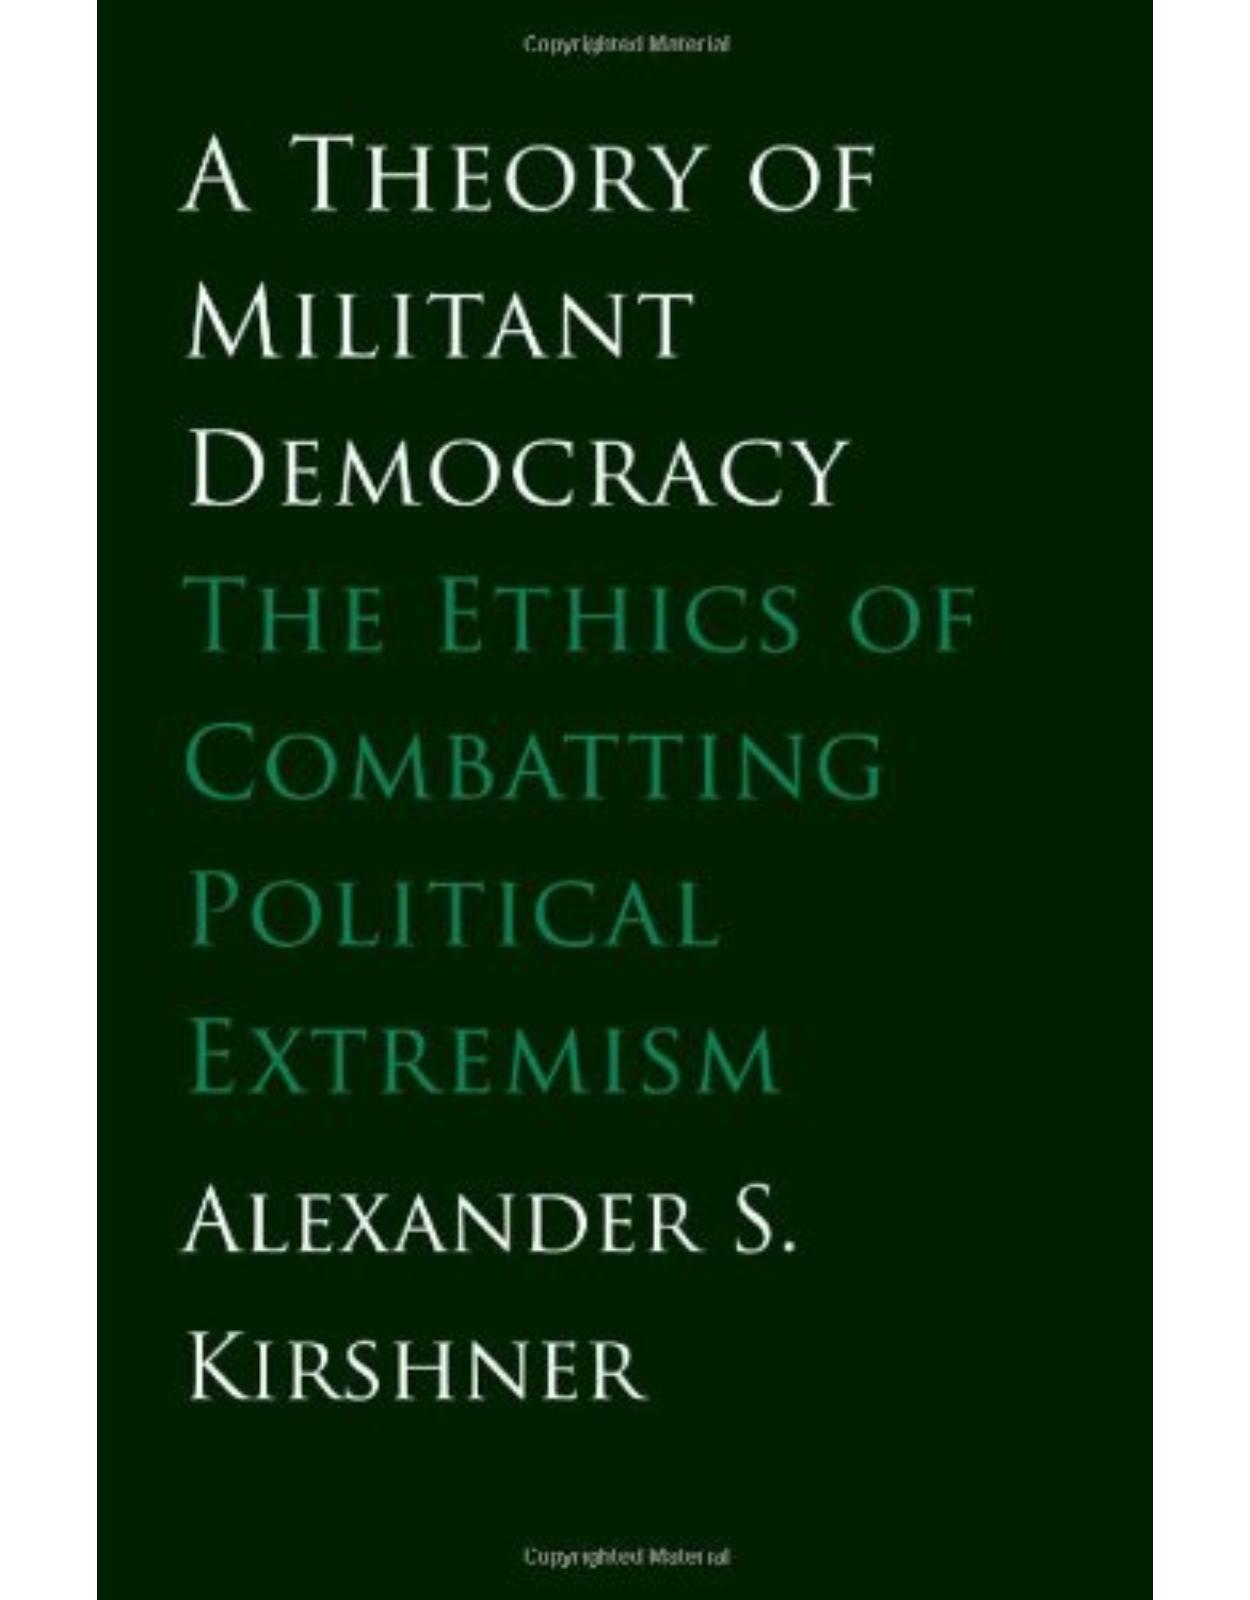 Theory of Militant Democracy. The Ethics of Combatting Political